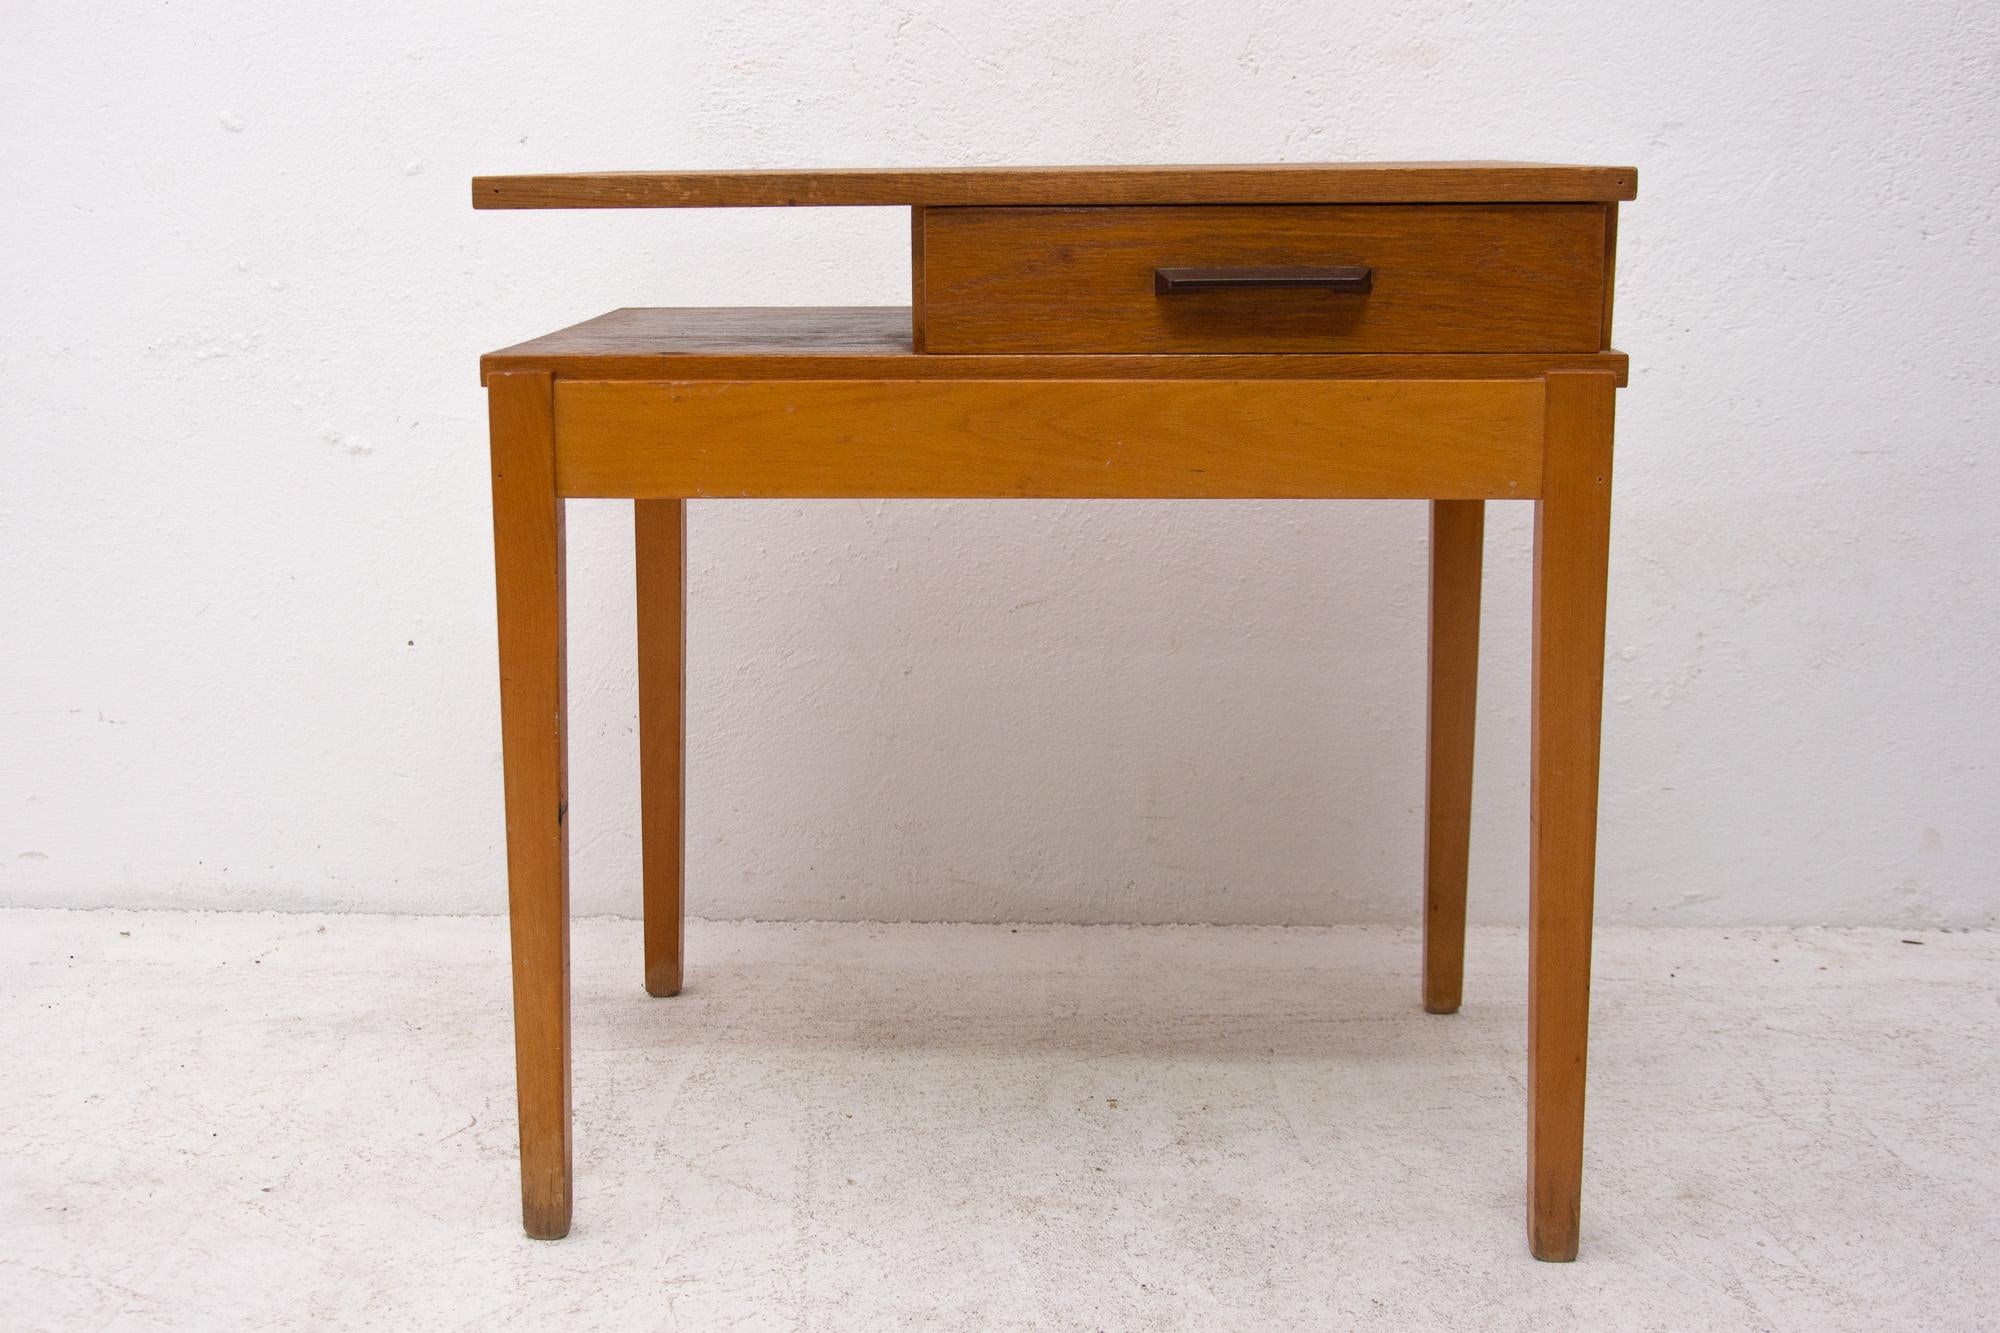 Midcentury side table with one plastic drawer. The table is made of beech wood and oak wood. At the top it shows signs of age and using. Overall is in preserved good Vintage condition. Cool retro piece.